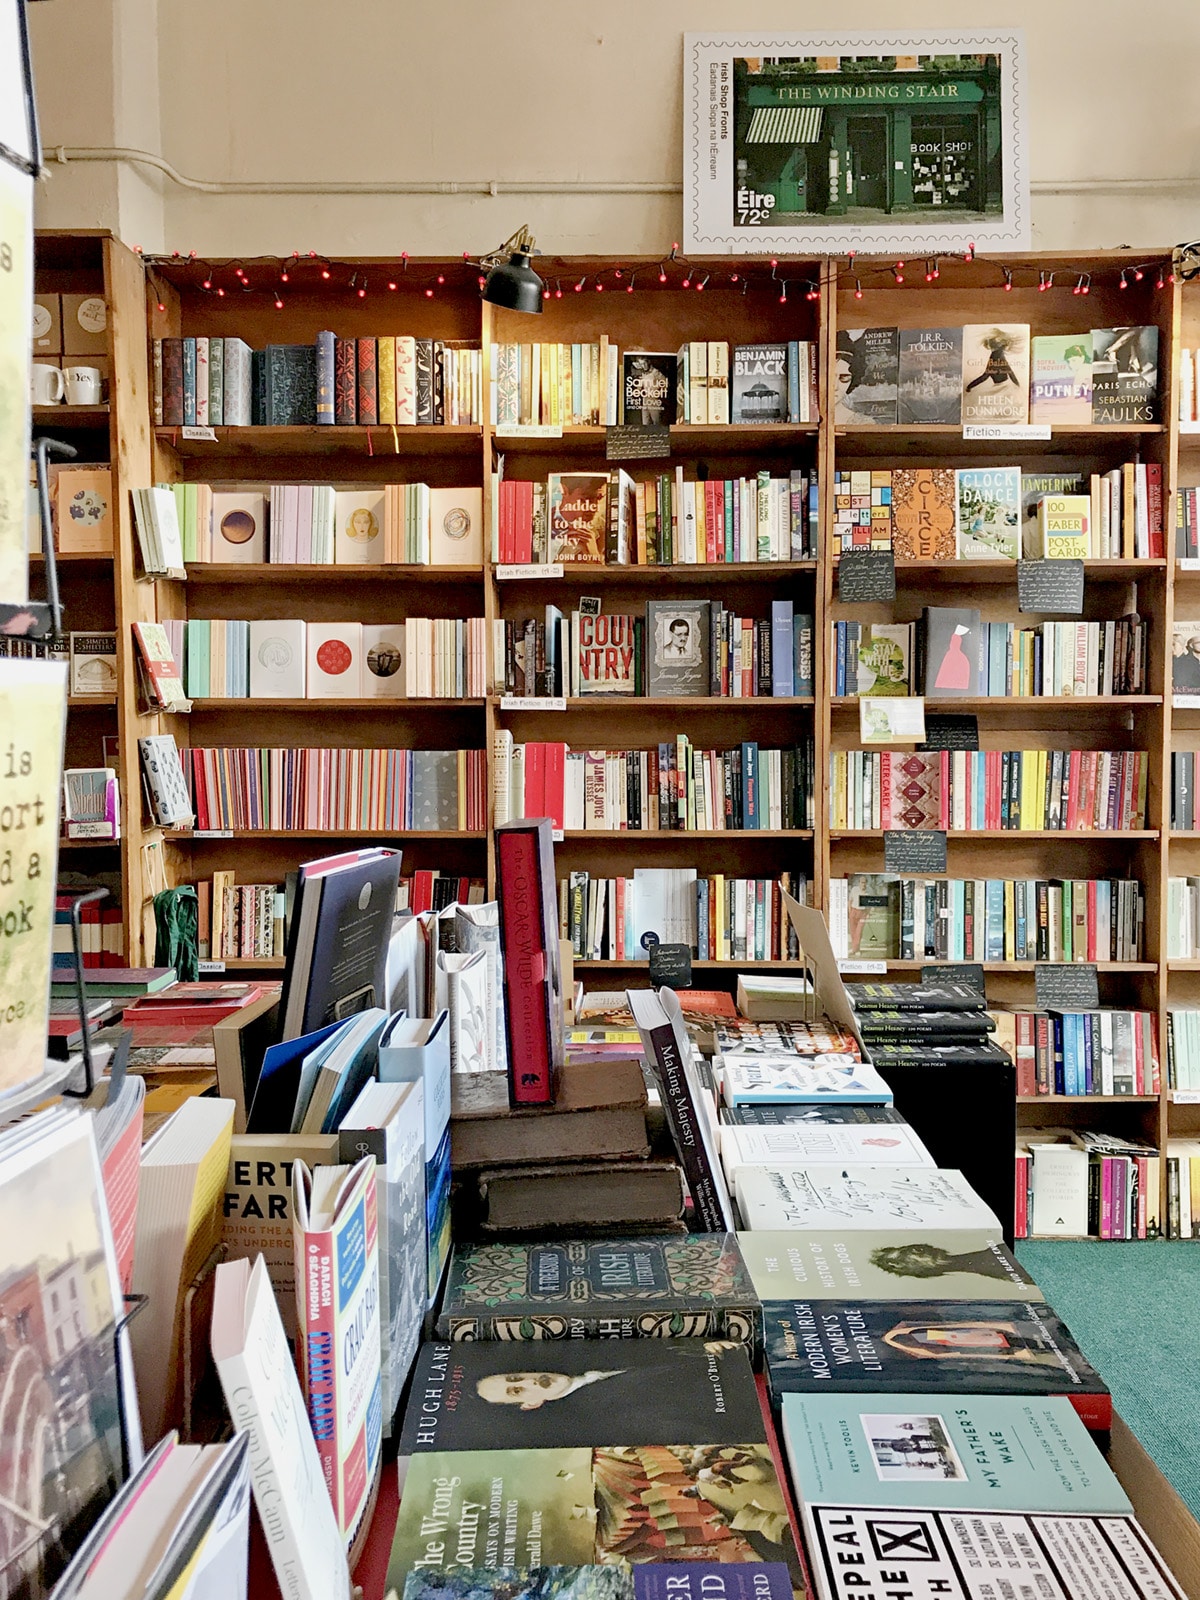 the infamous winding stair bookstore and cafe on the river in dublin | coco kelley